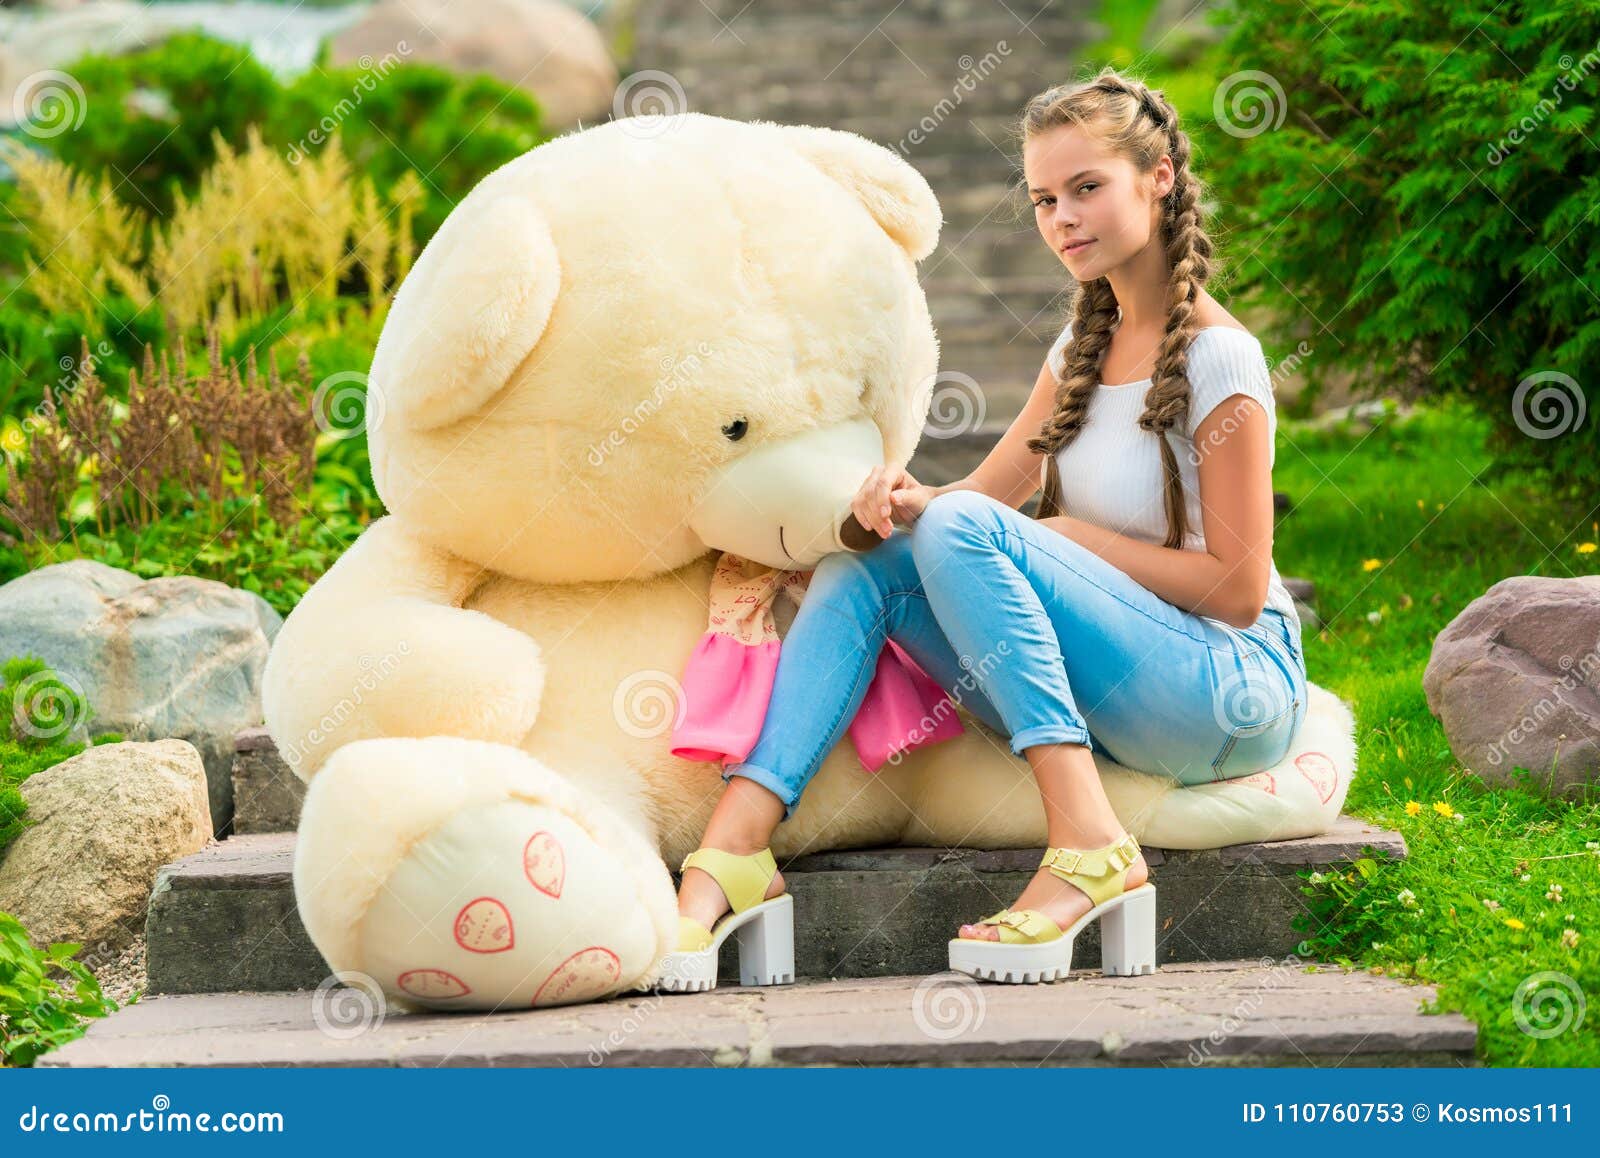 Beautiful Girl 20 Years Old with a Big Teddy Bear in the Park ...